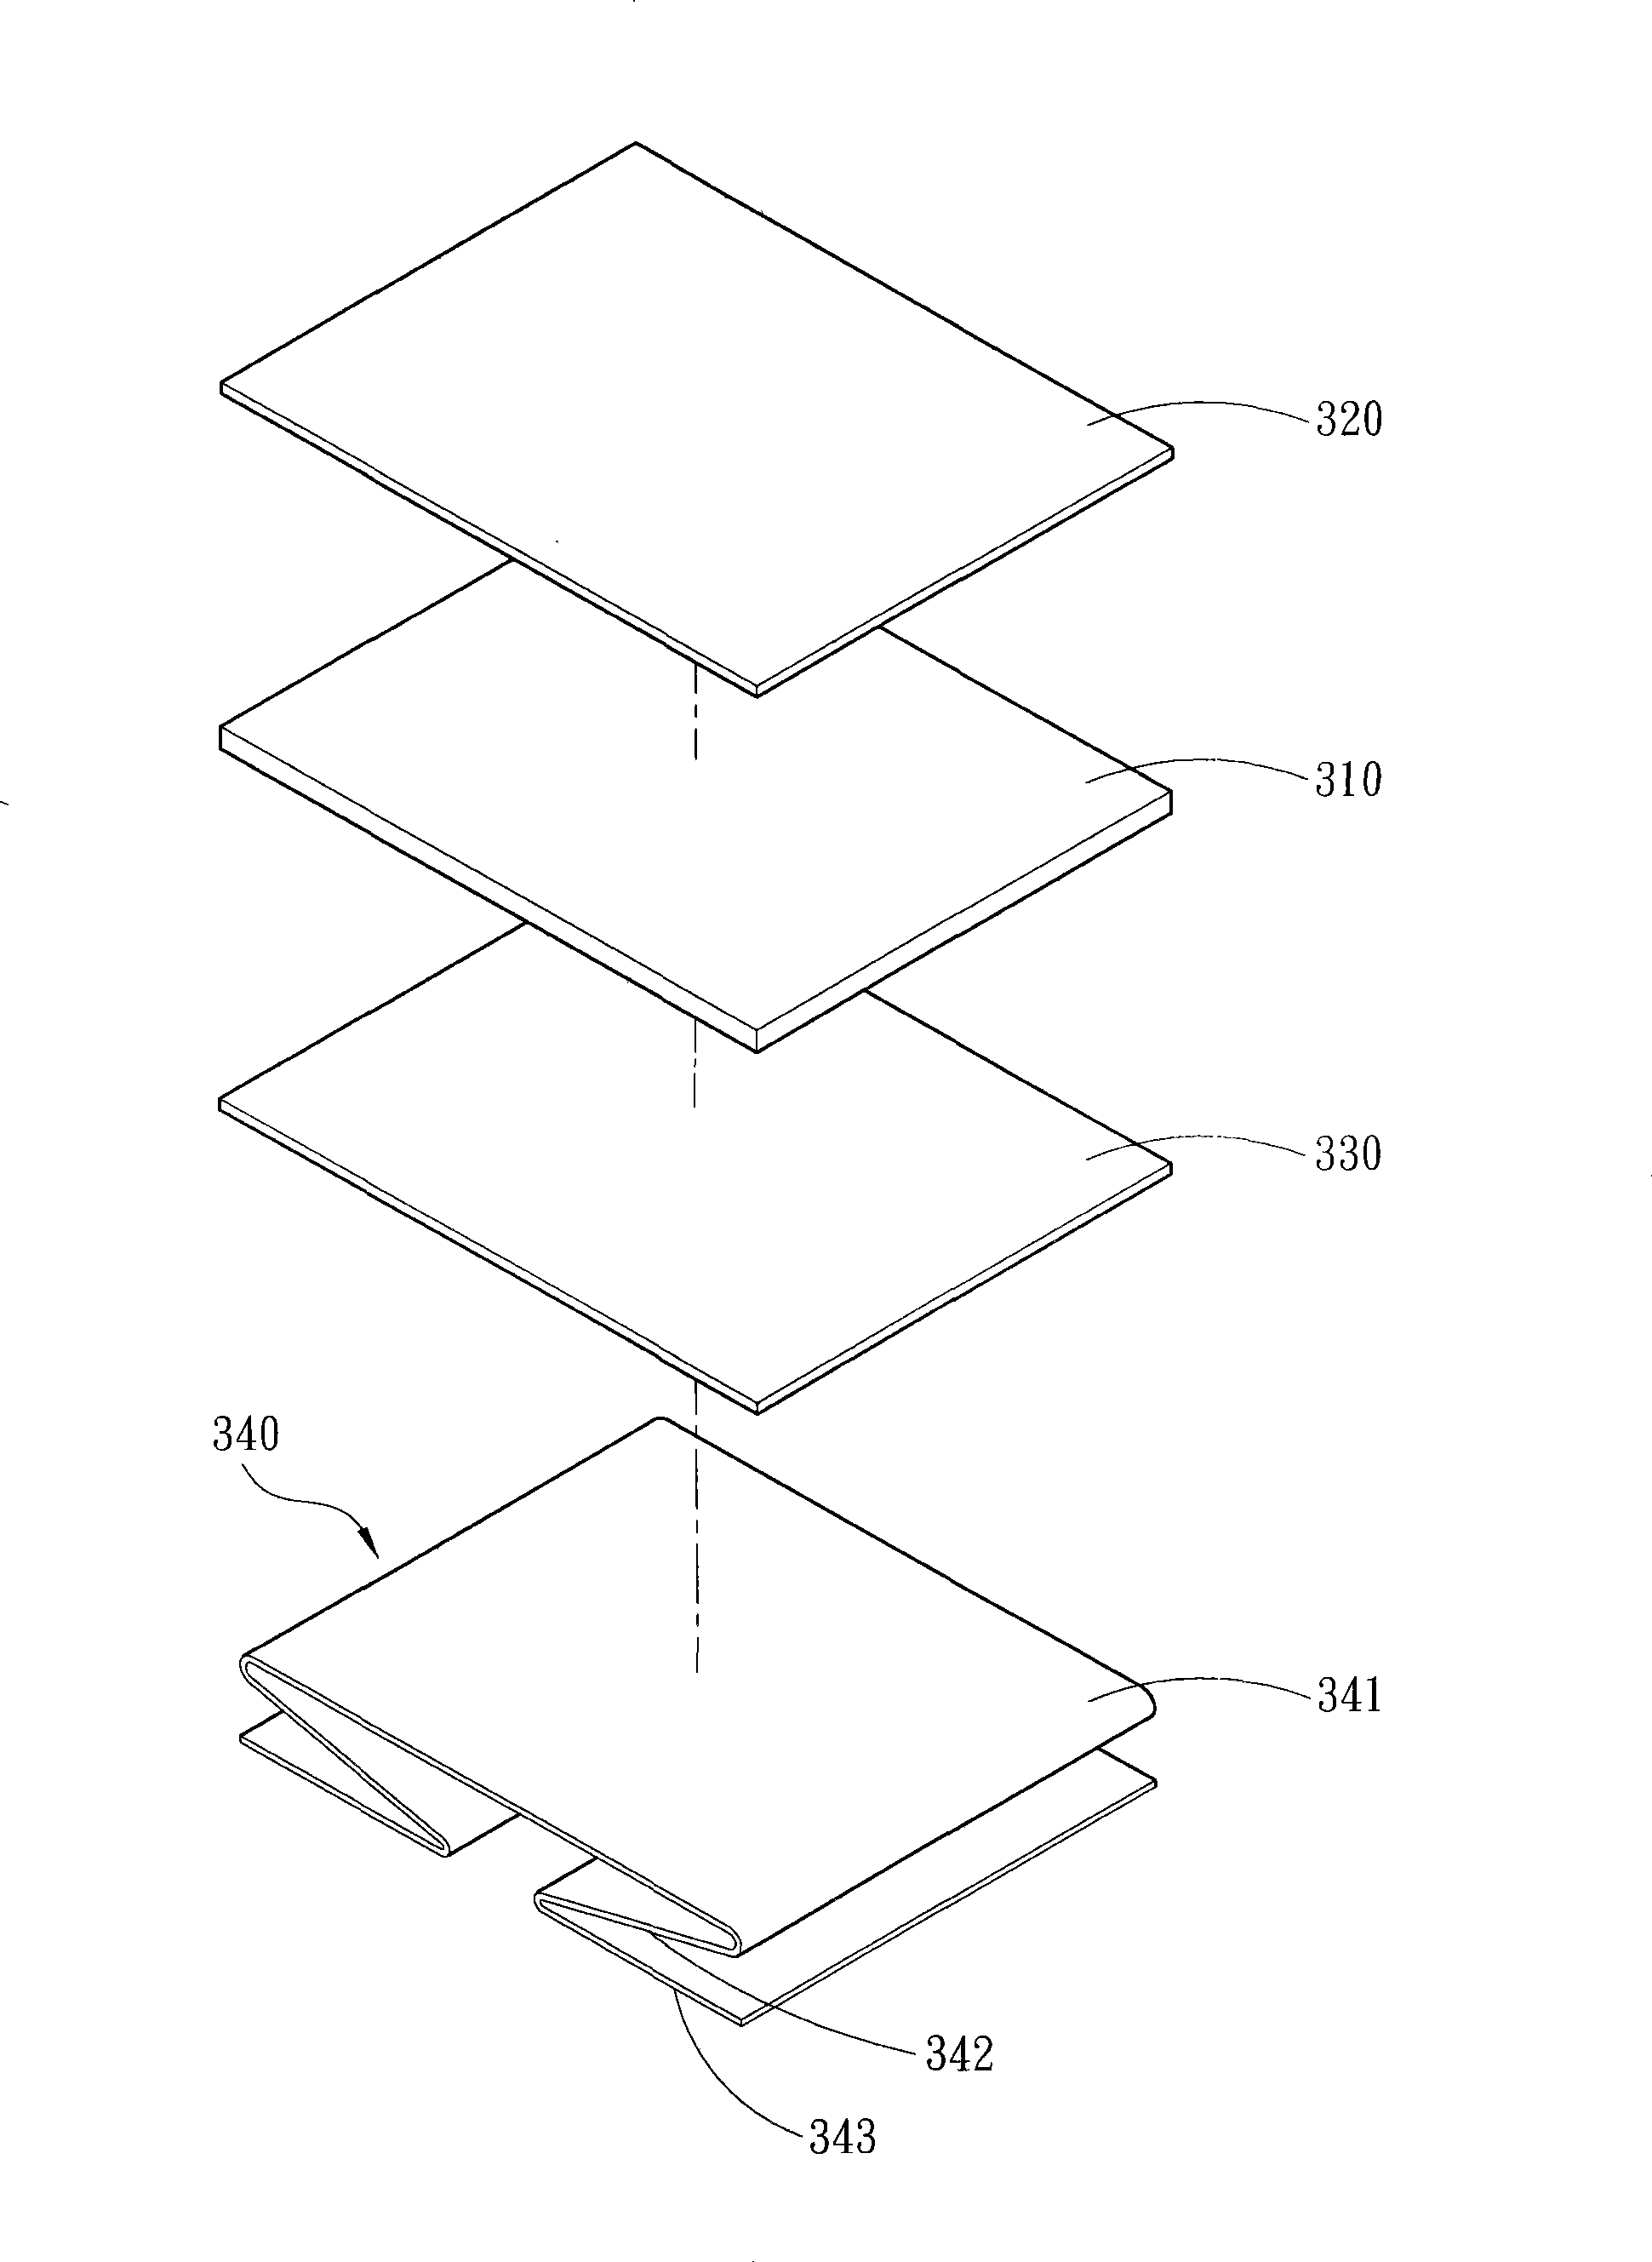 Elastic heat conducting and radiating device